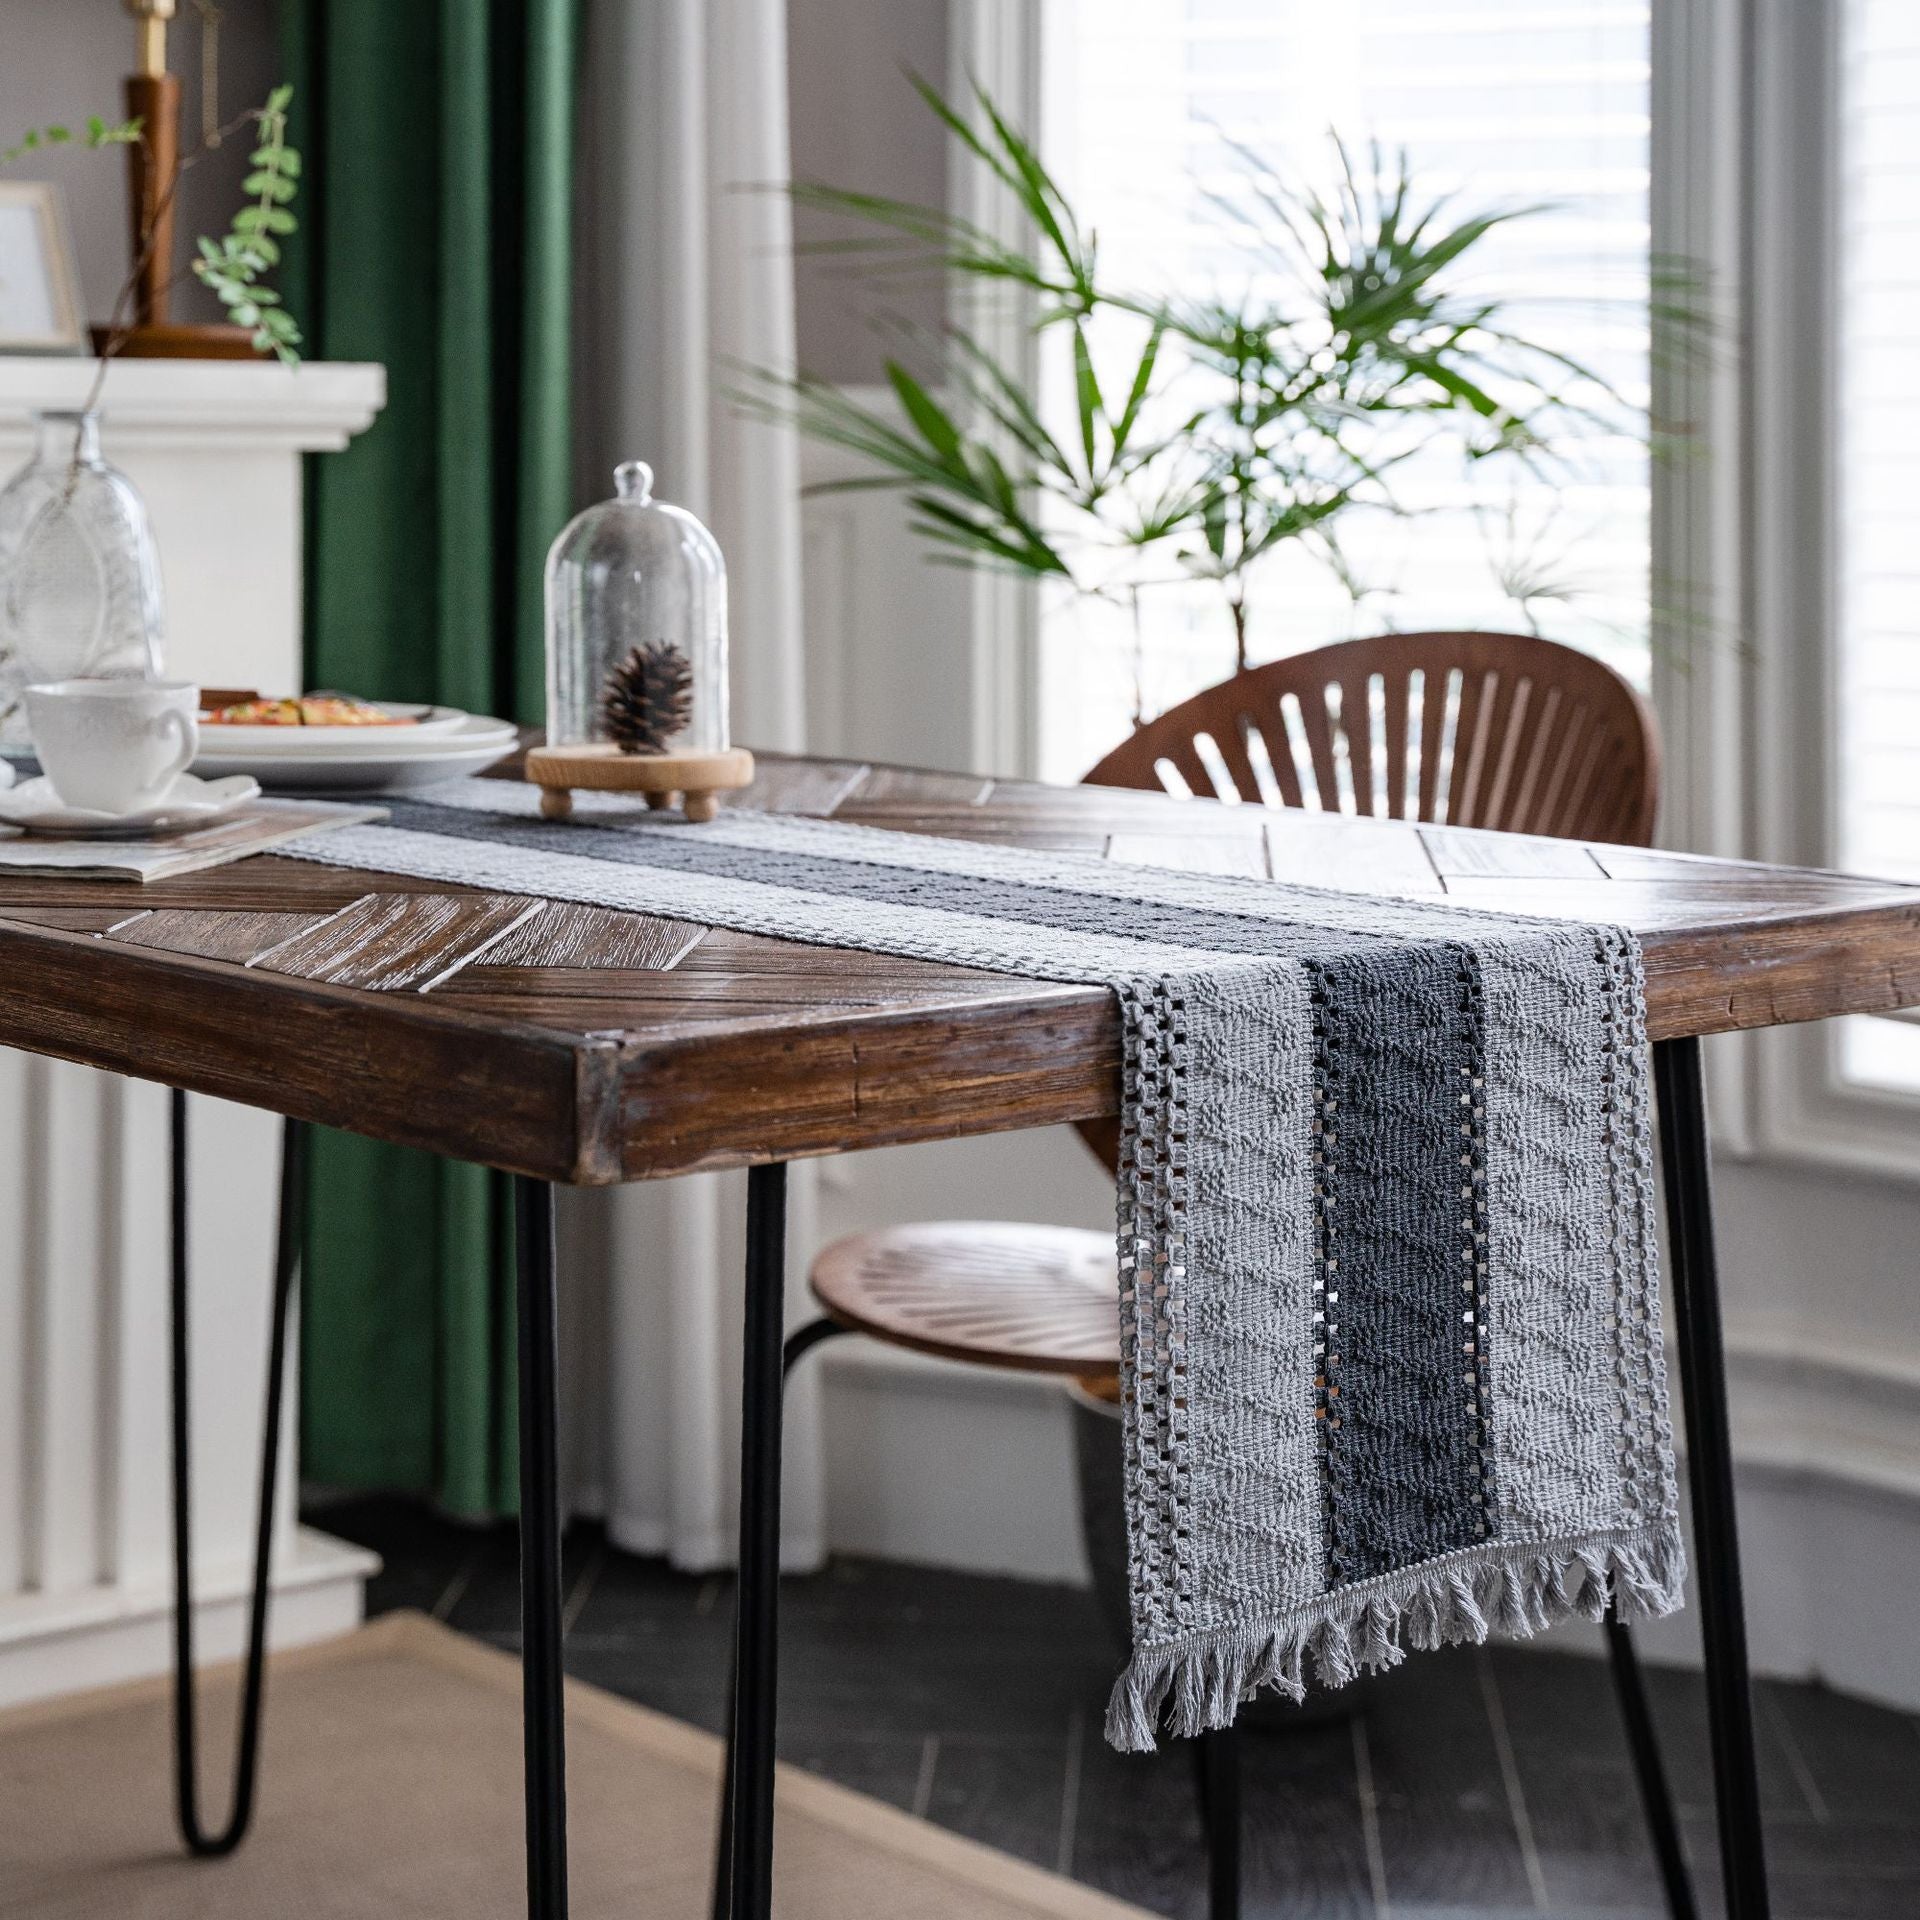 30X120 : 11.81″ * 47.24″, MULTI PATTERNED TABLE CLOTH TABLE RUNNER